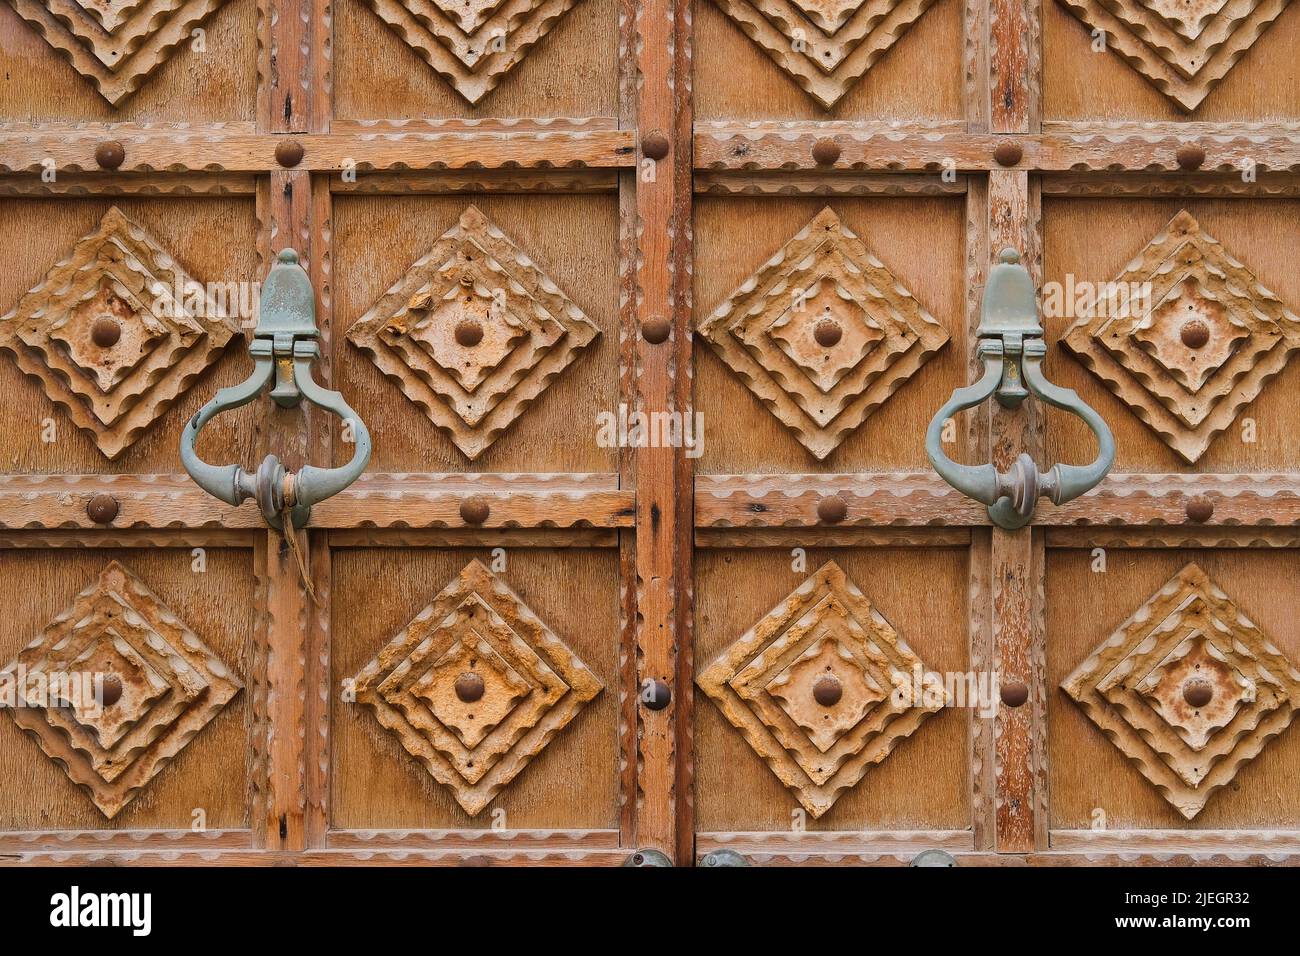 Minimalist wood carving design on timber gate. Fragment of vintage entrance door traditional carvings and patina handles Stock Photo